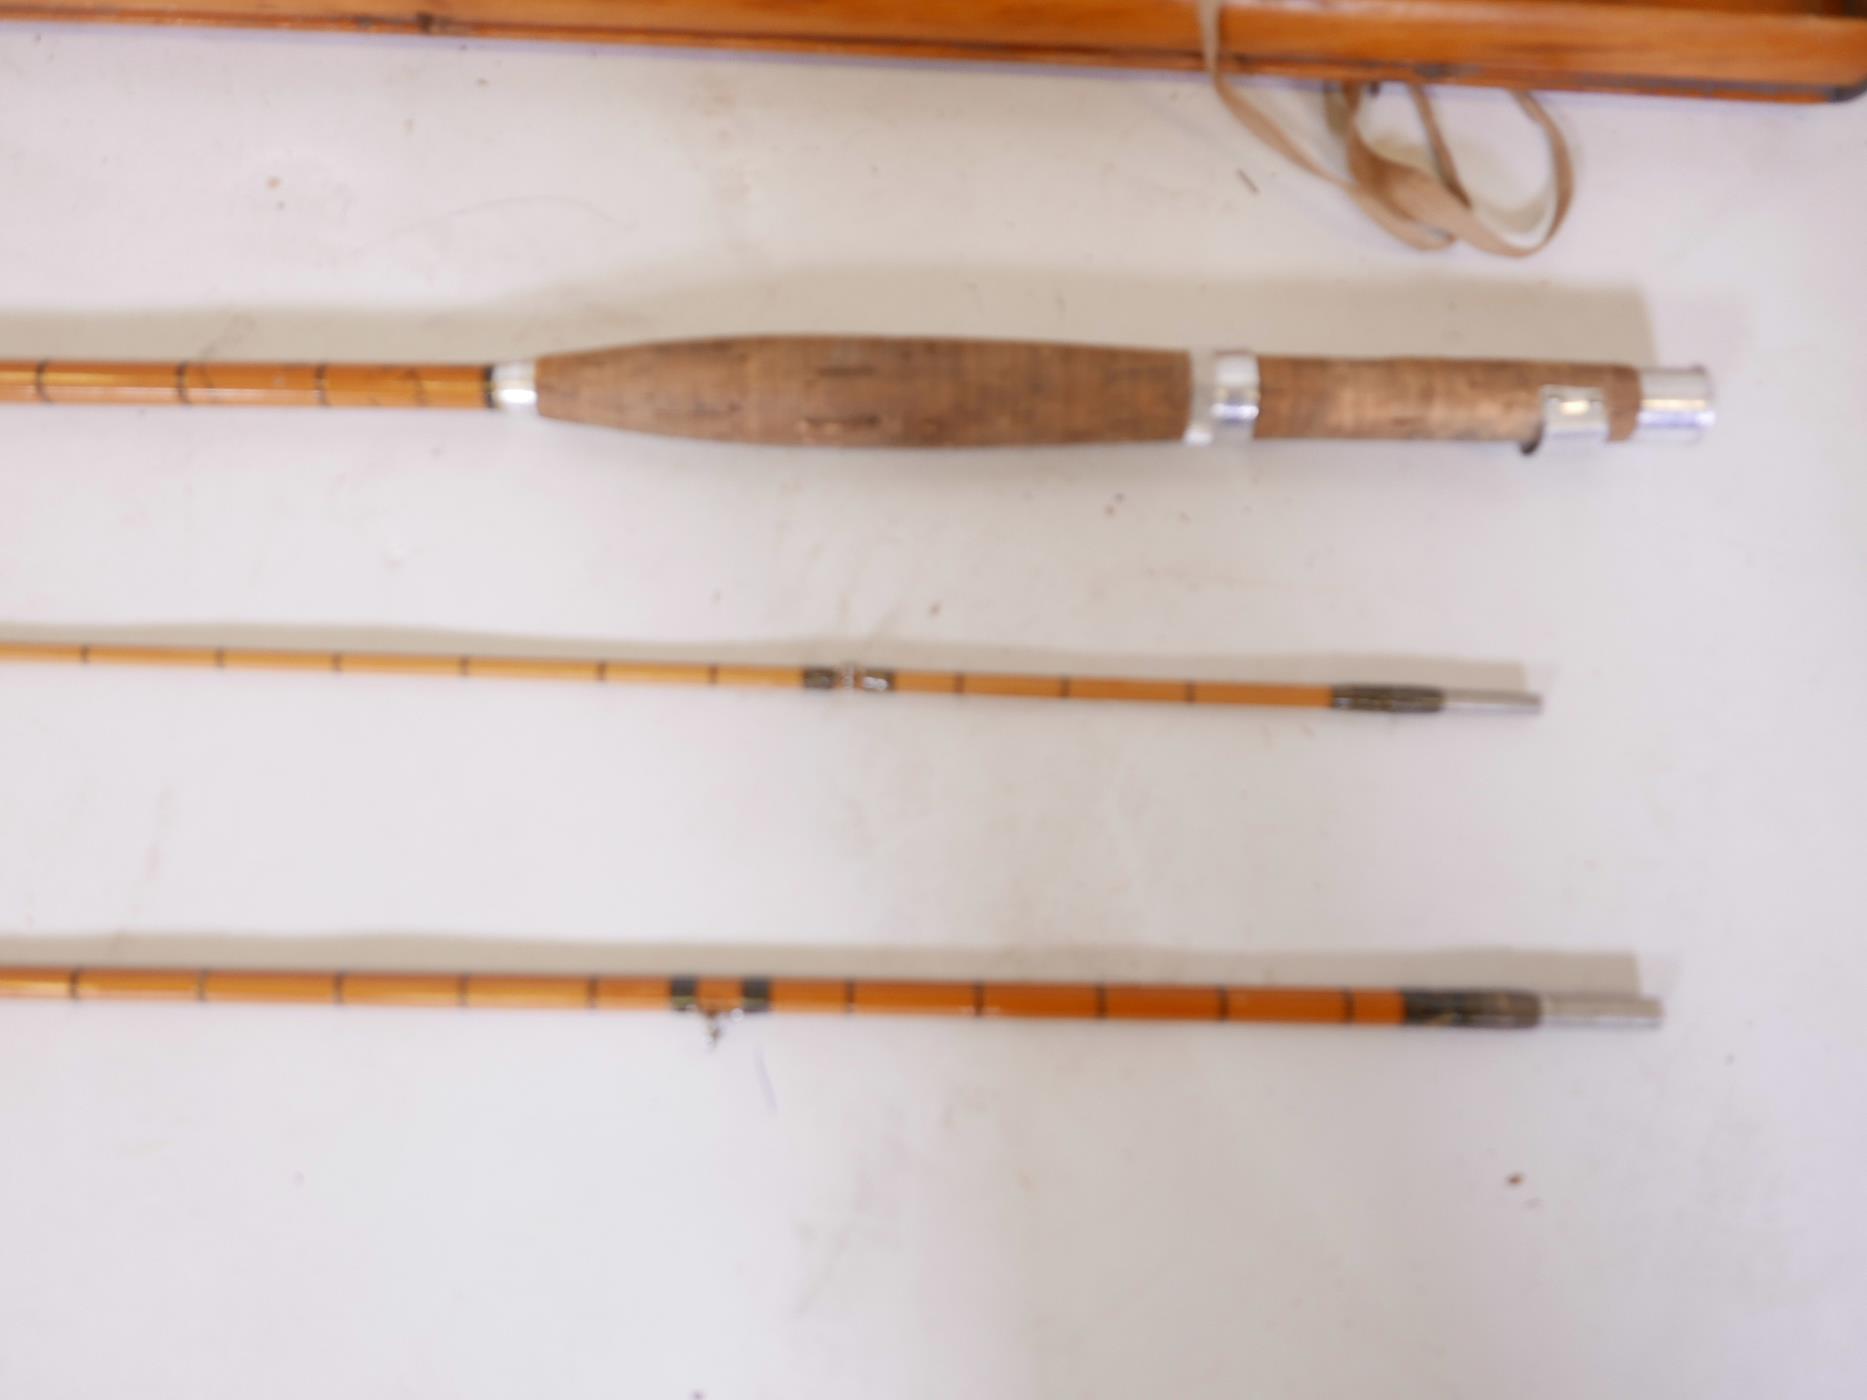 A Hardy Bros split cane three section fly fishing rod by Mark Palakona in a wooden case and original - Image 4 of 6